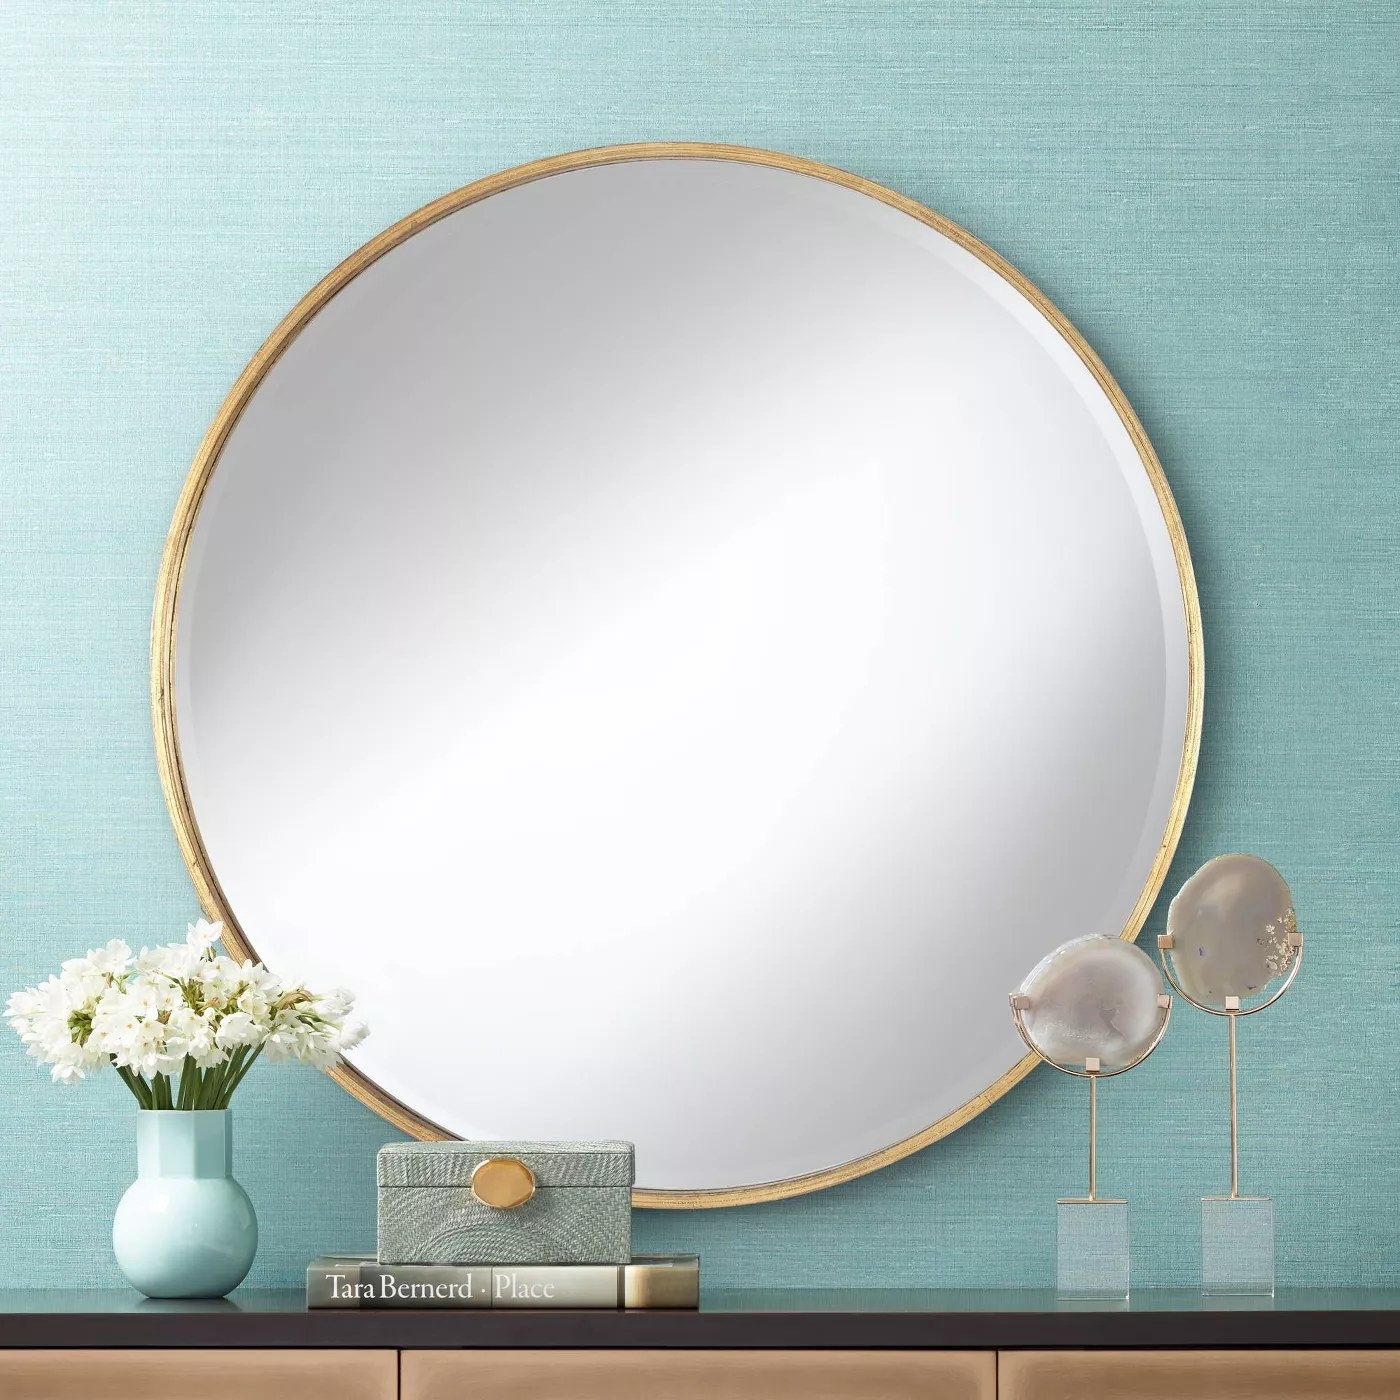 A round mirror with a gold frame mounted on an aqua wall